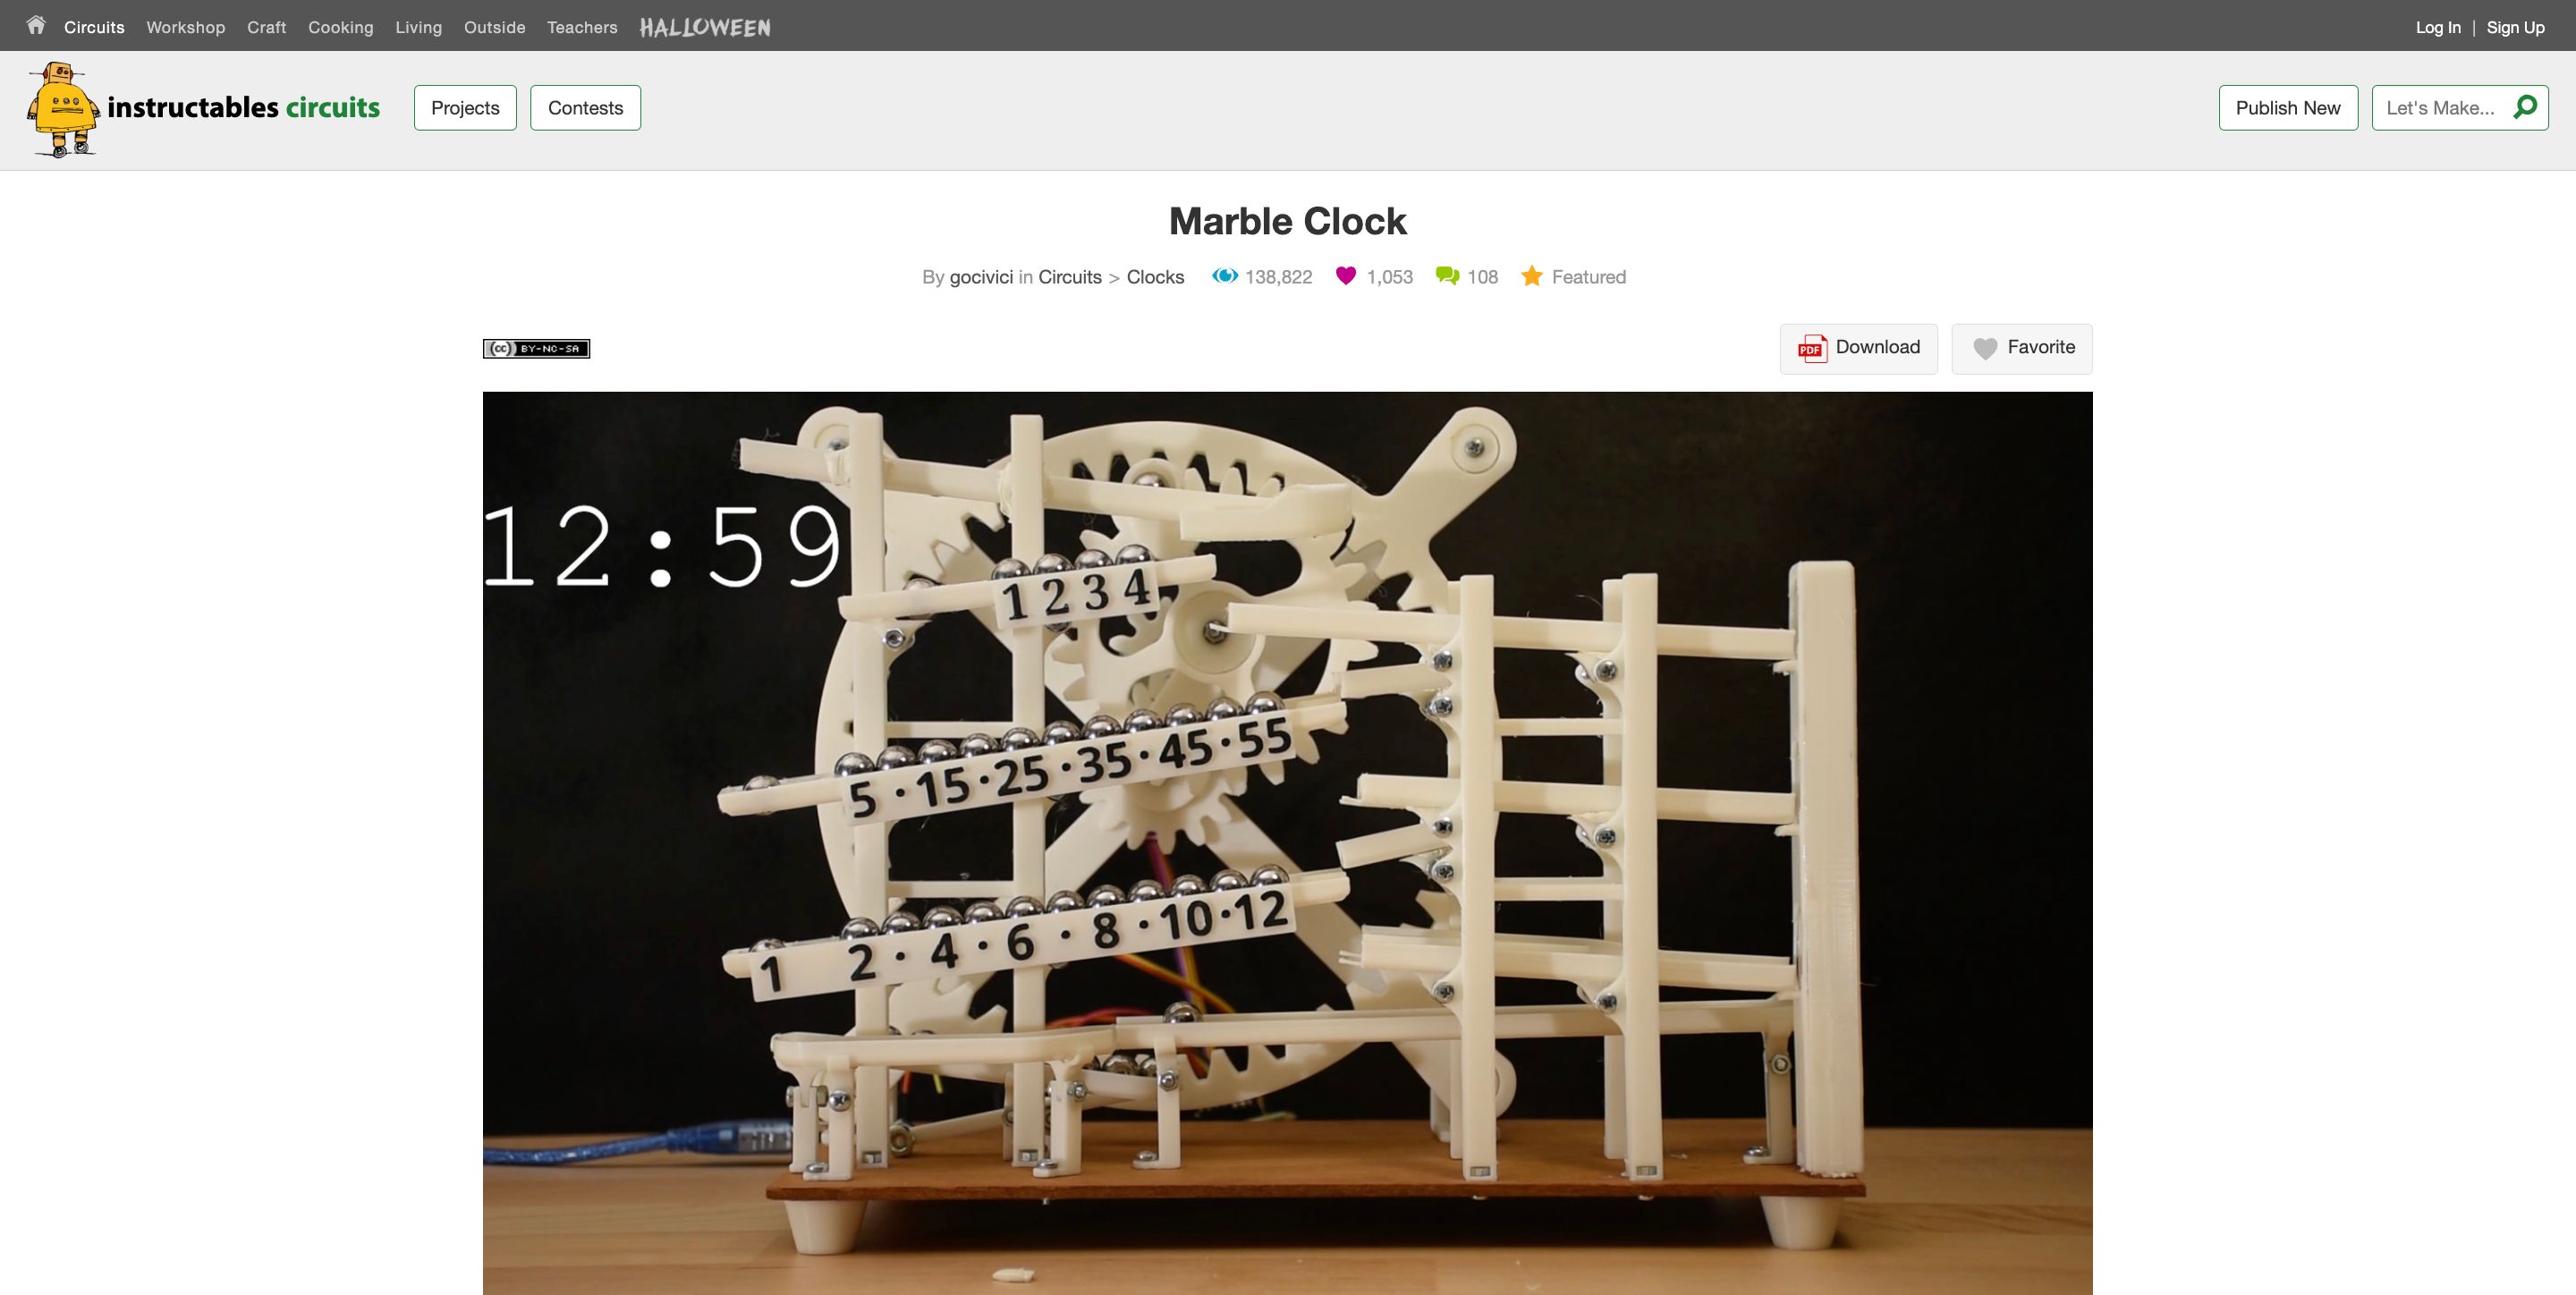 Marble Clock Instructables project page